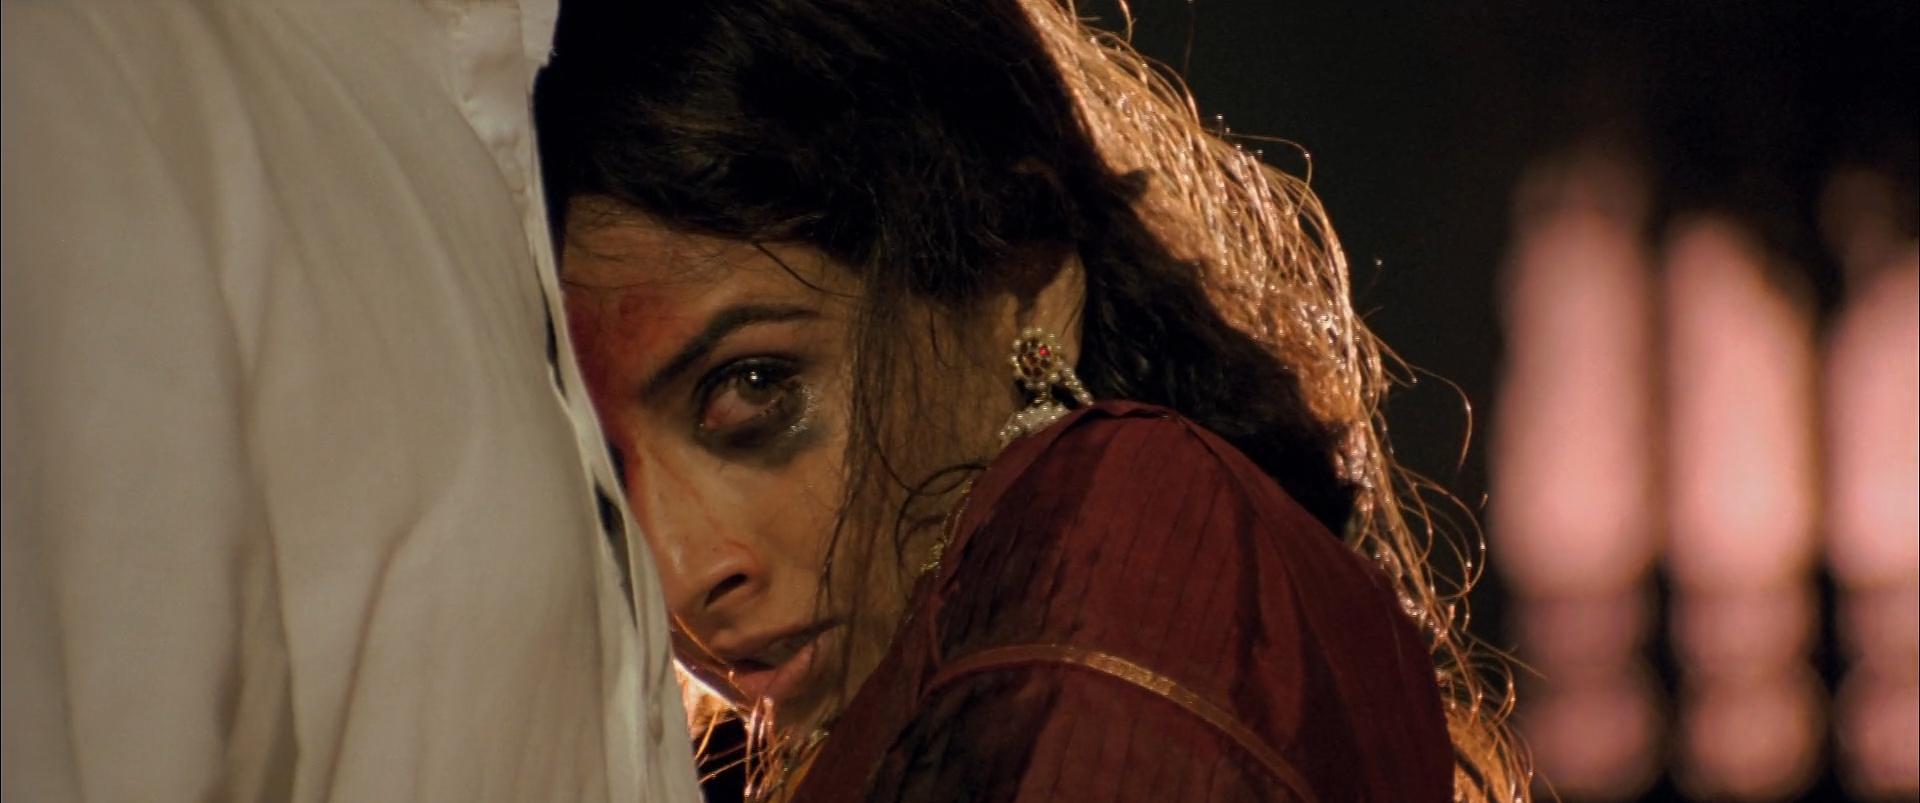 Vidya Balan looking disheveled with make up smeared across her face